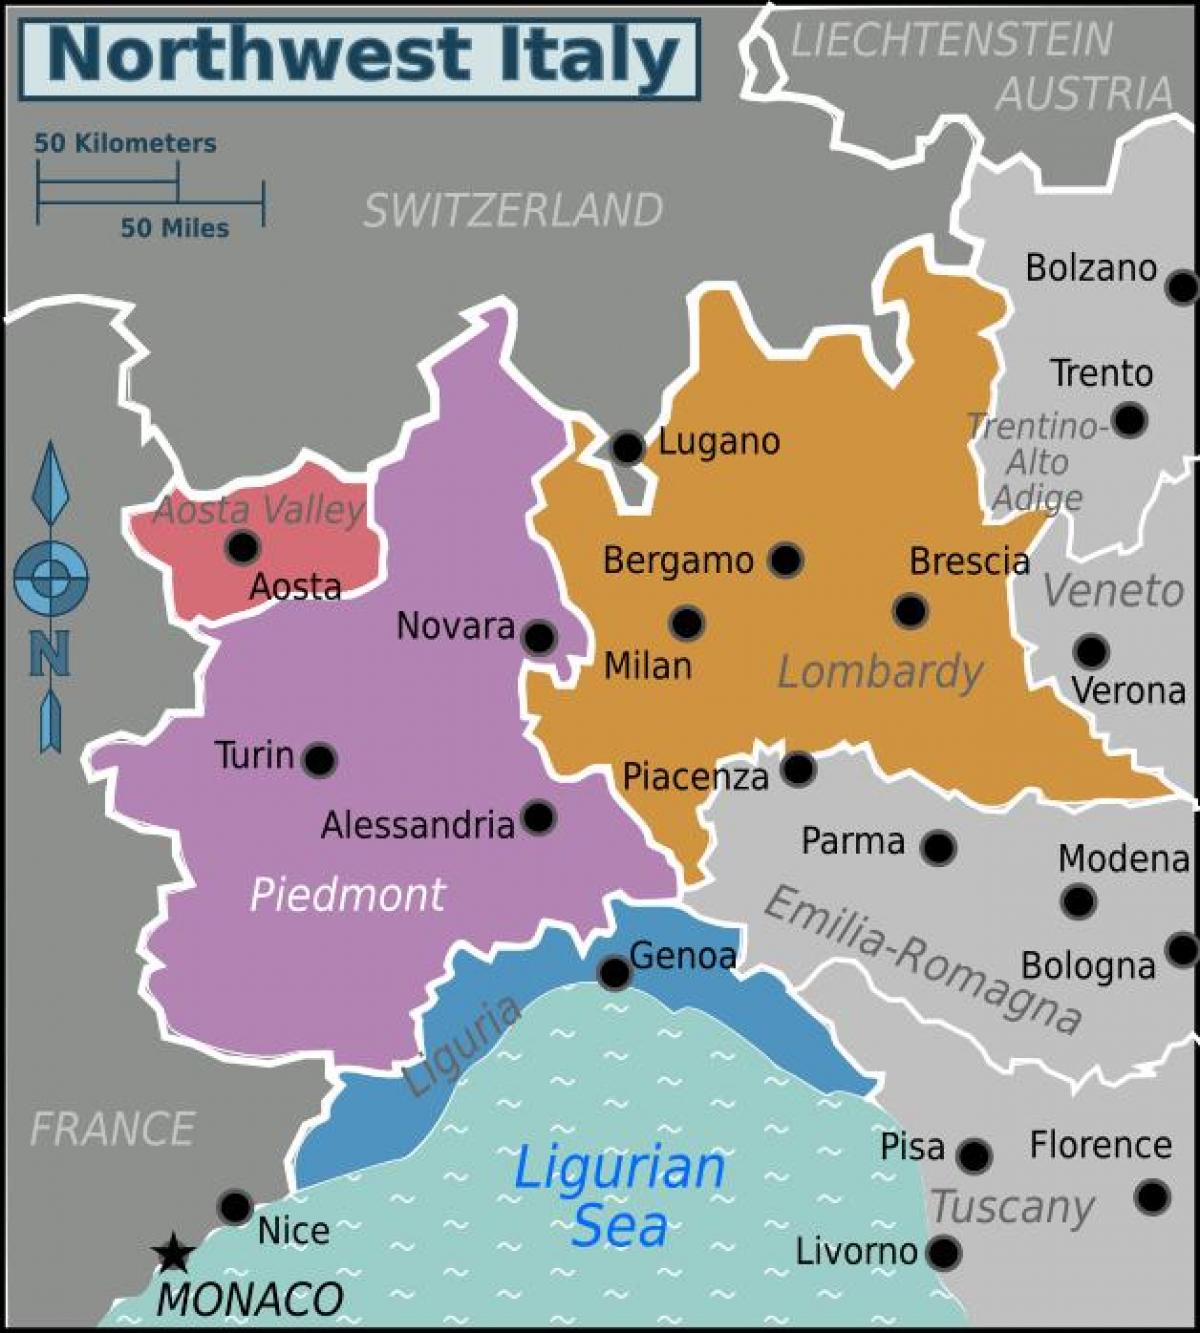 north west Italy map